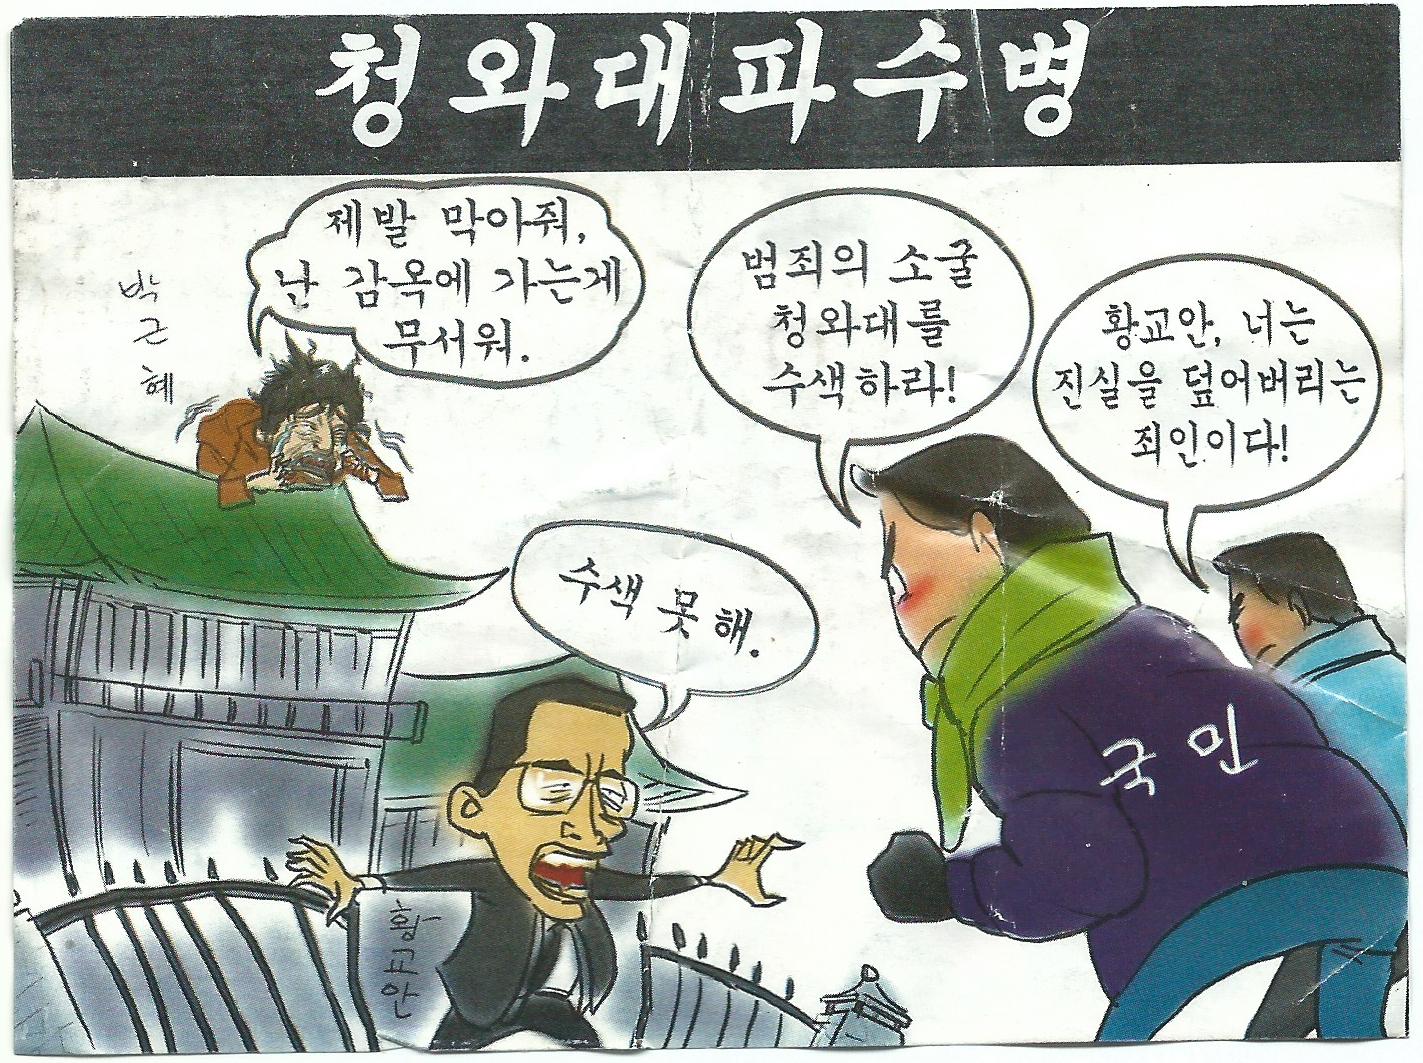 A drawing on one side of a leaflet depicts former South Korean leader Park Geun-hye cowering atop the presidential Blue House and on the opposite side, the gruesome decapitation of then-Prime Minister Hwang Kyo-ahn.